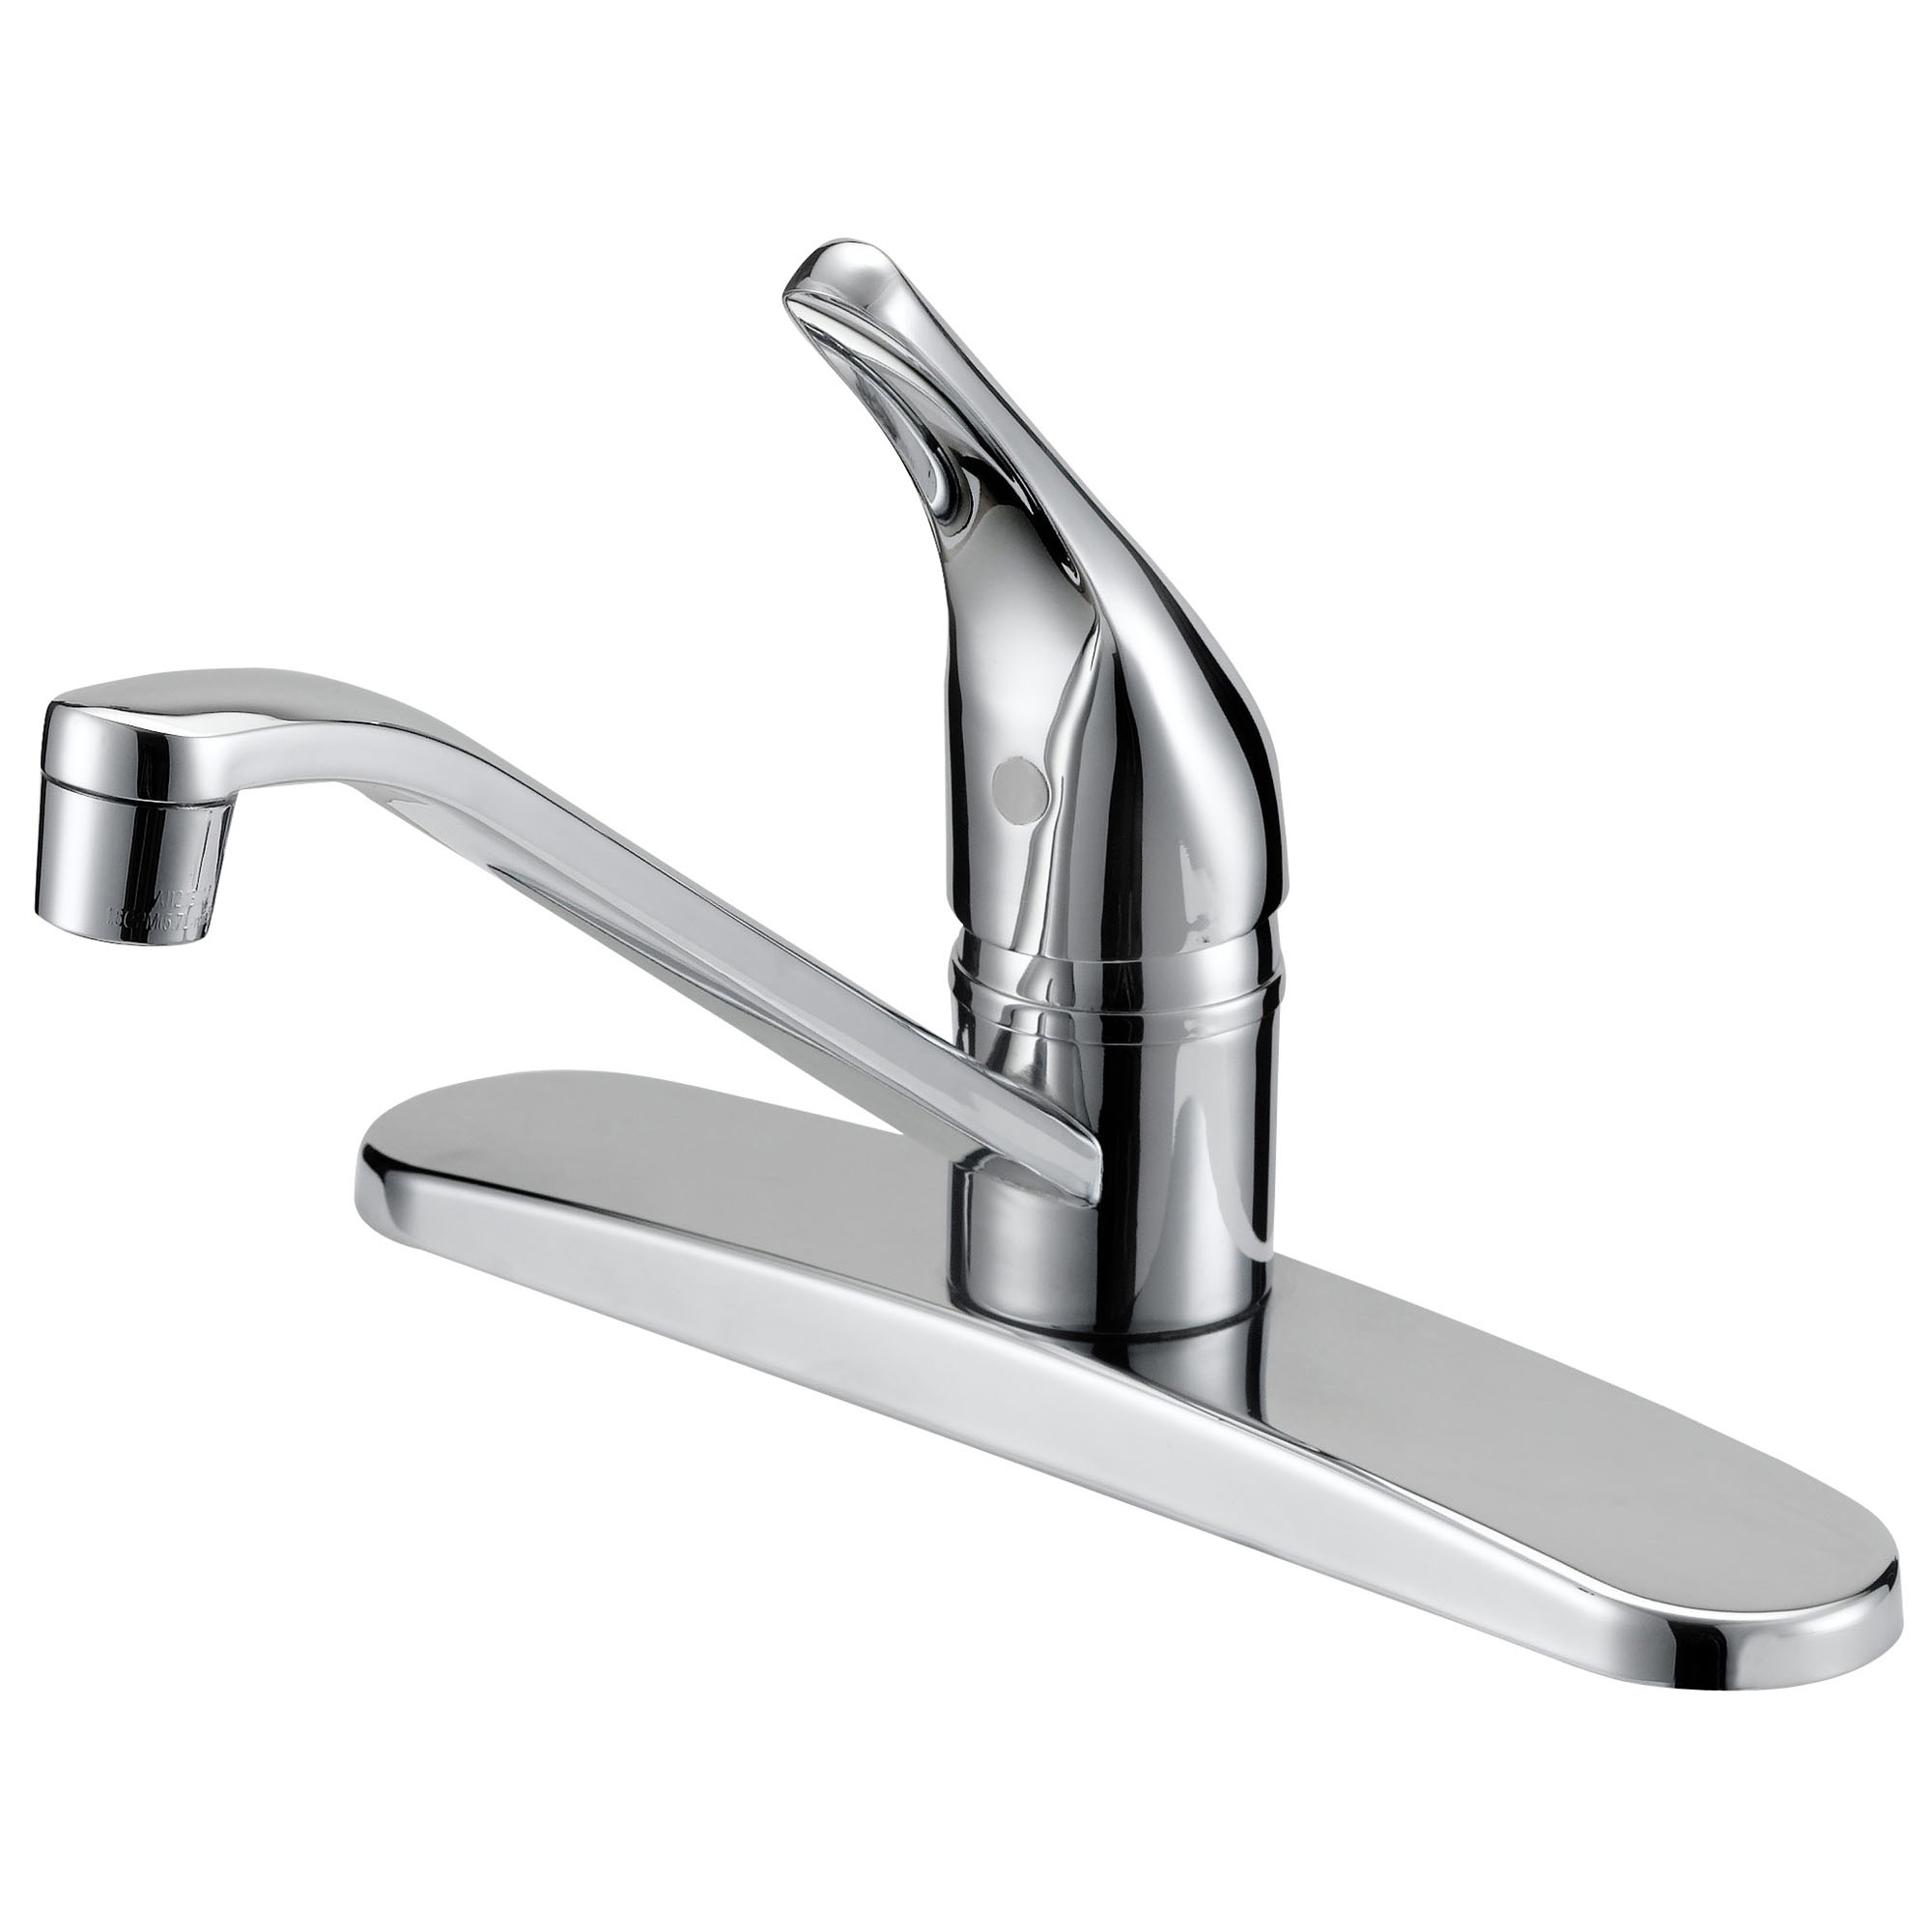 FS610048CP Kitchen Faucet, 1.8 gpm, 4-Faucet Hole, Metal/Plastic, Chrome Plated, Deck Mounting